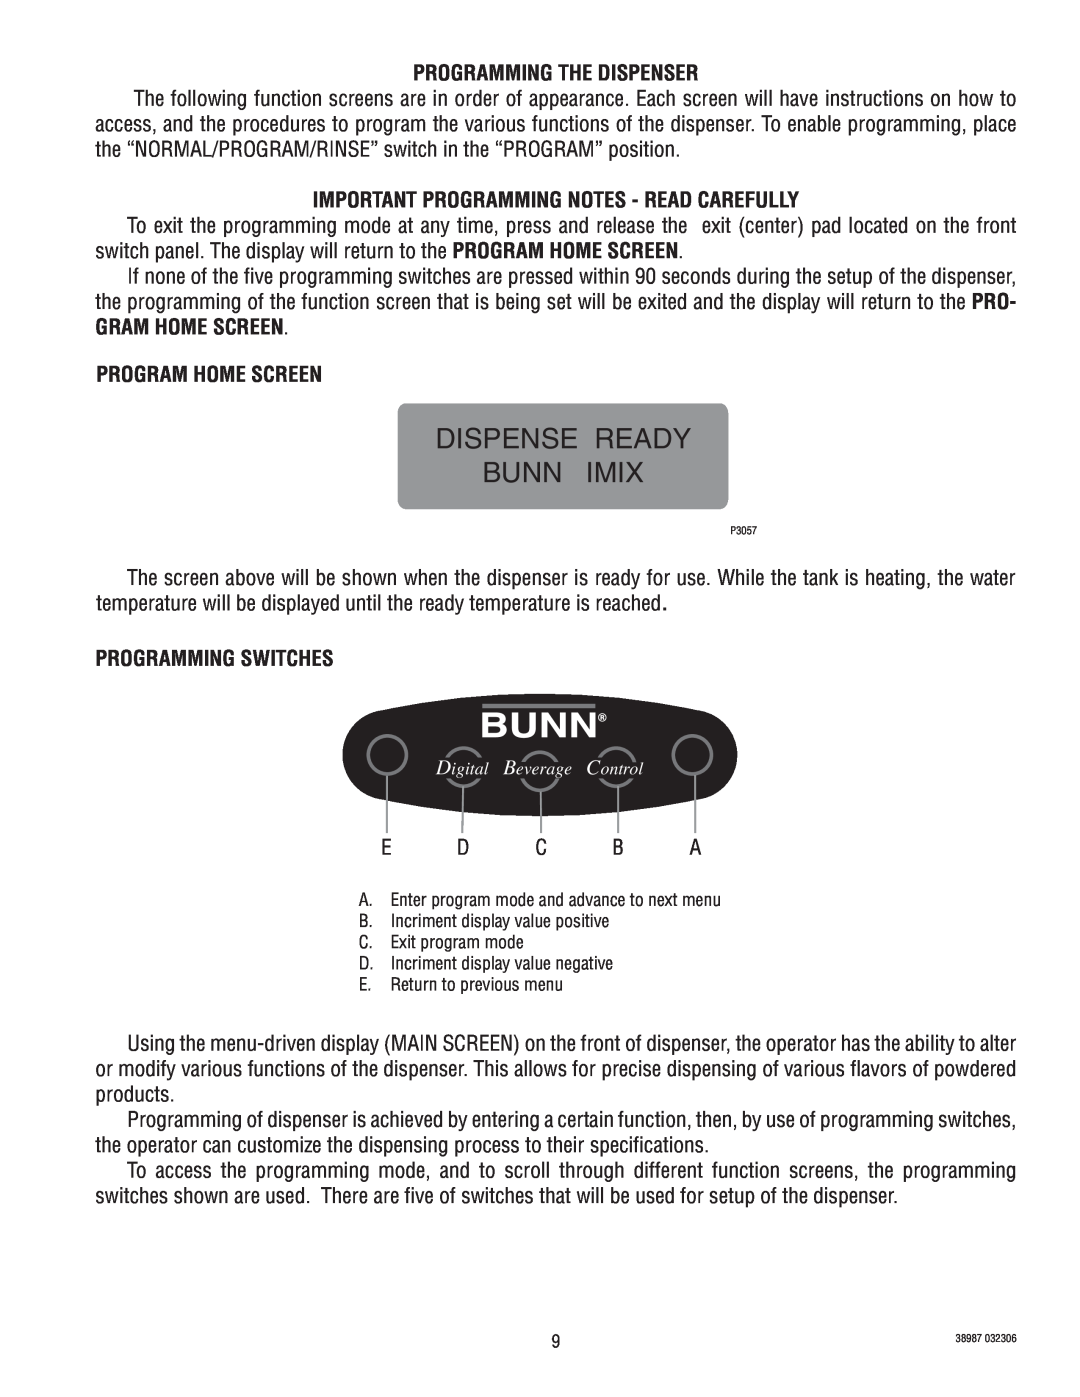 Bunn IMIX -3S+A, IMIX -5S+A Programming The Dispenser, Important Programming Notes - Read Carefully, Programming Switches 